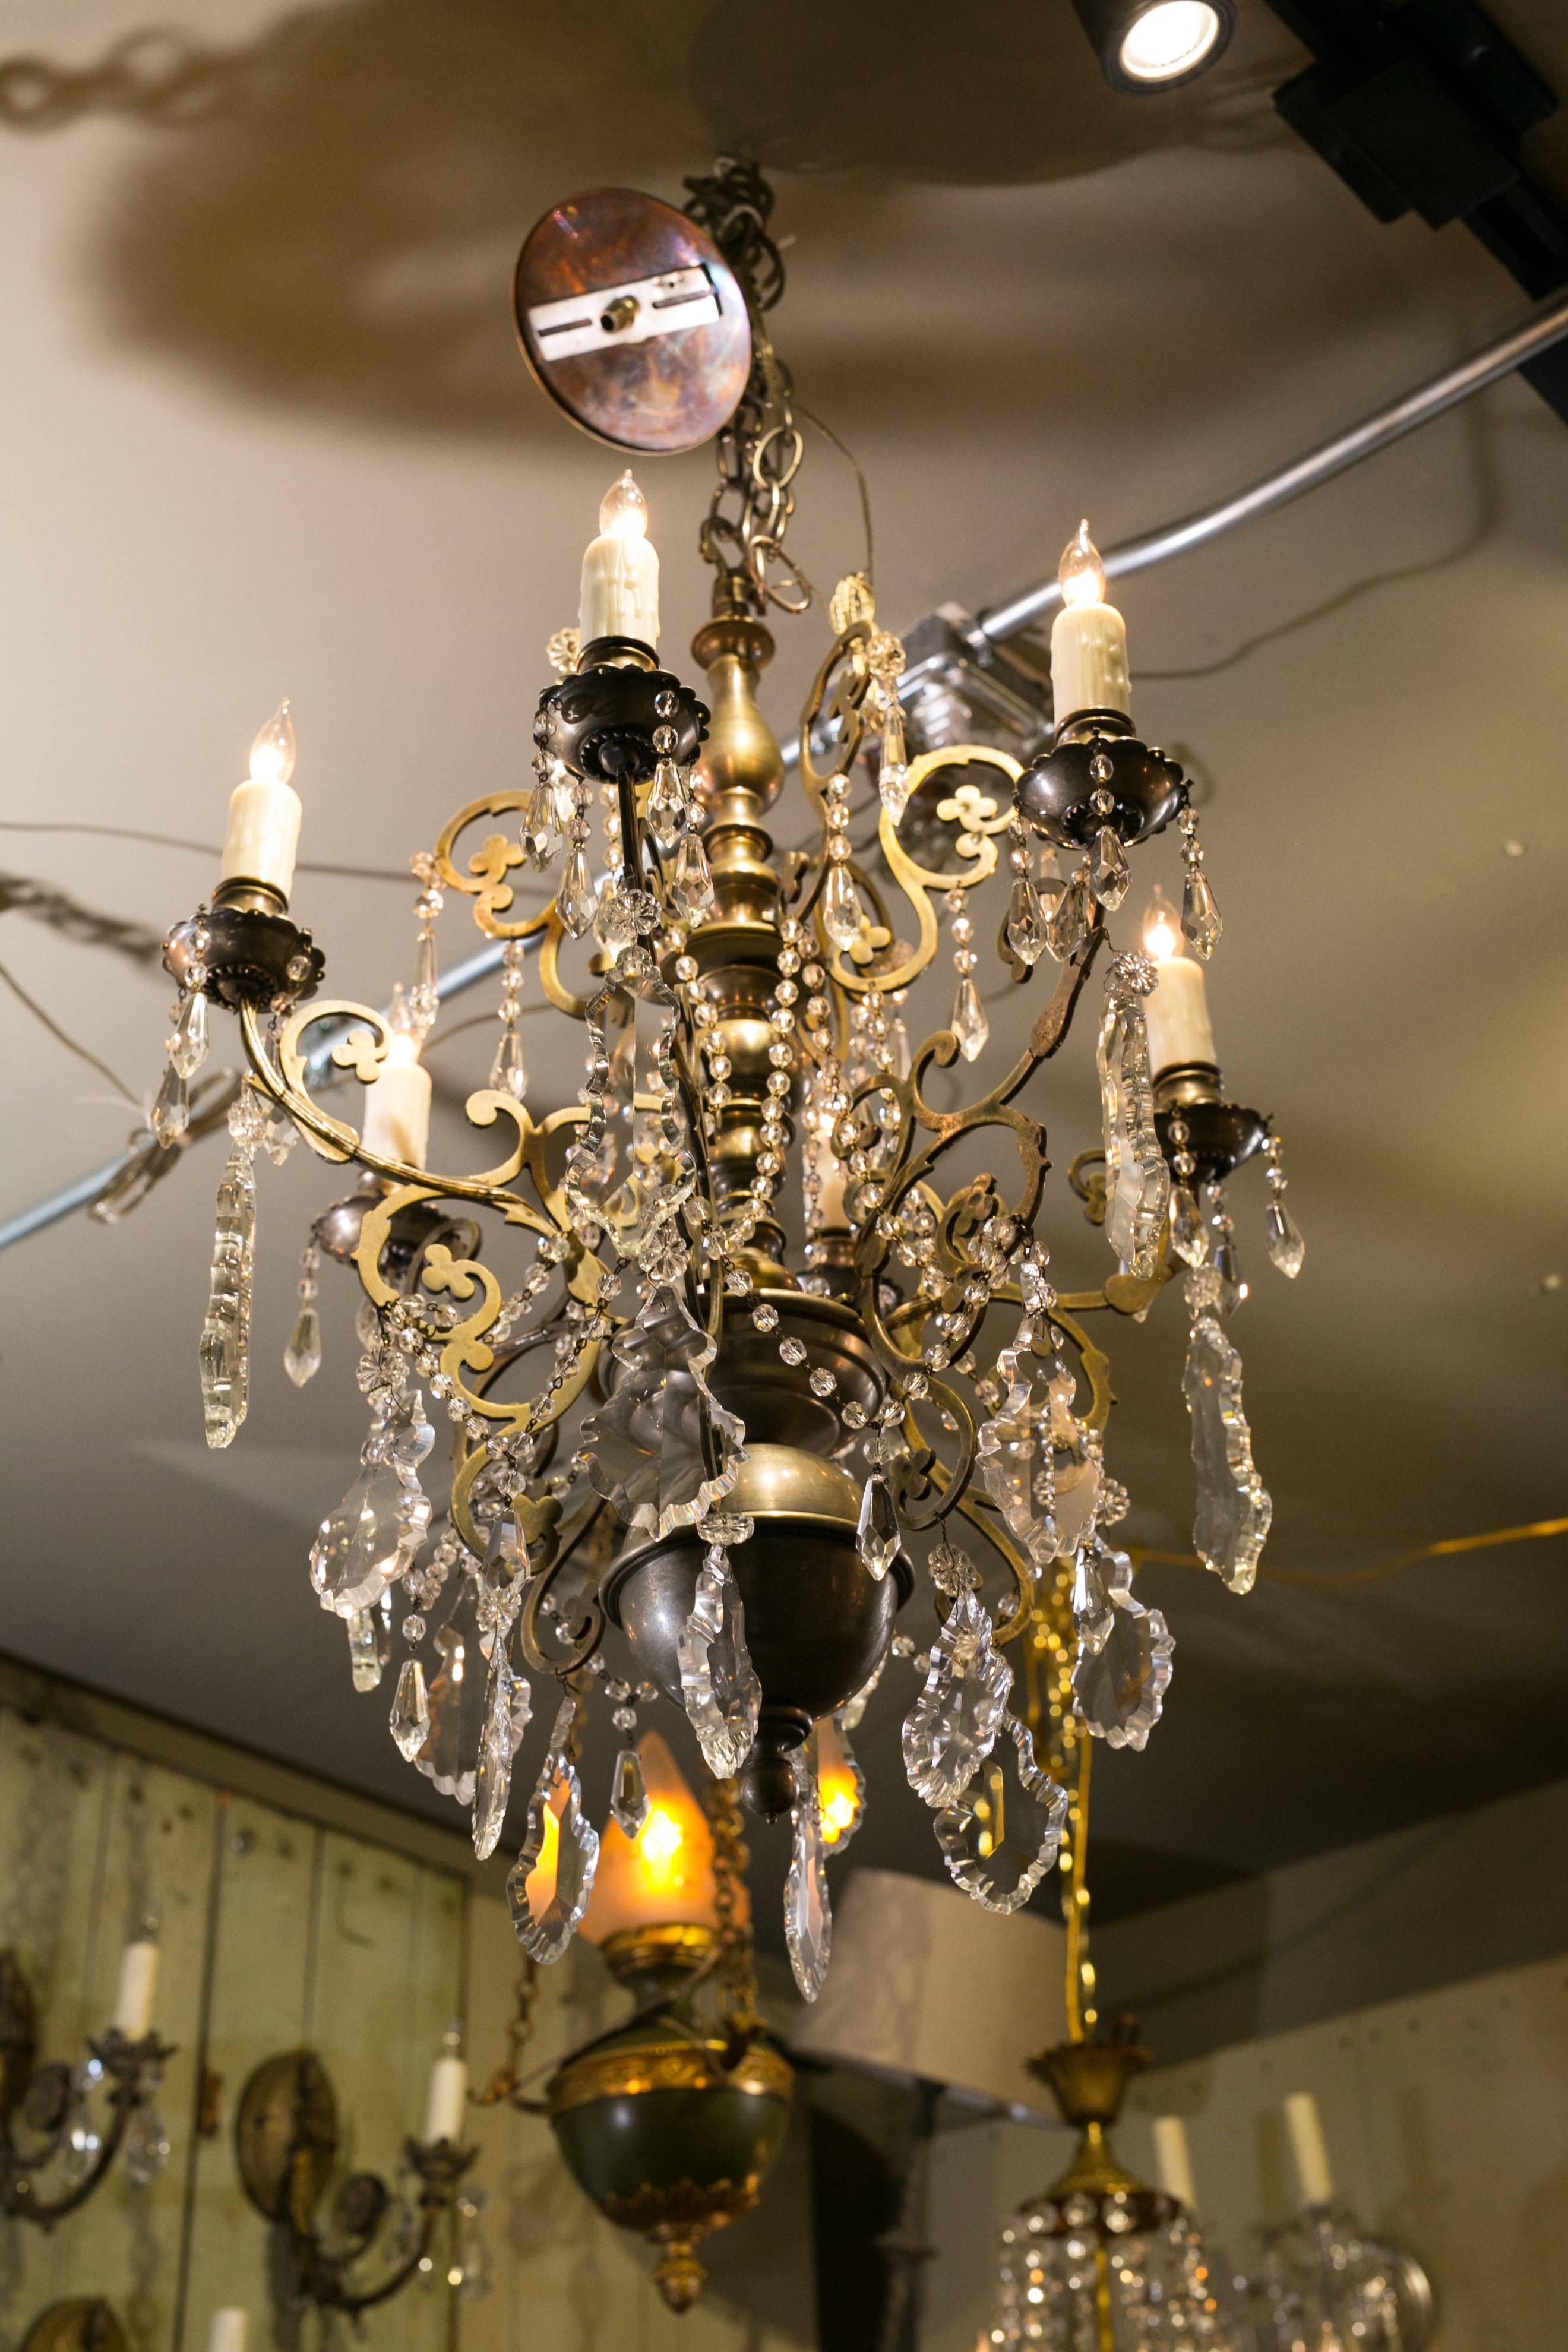 Cast Pewter Colored Crystal Chandelier with Six Arms from Belgium, circa 1930